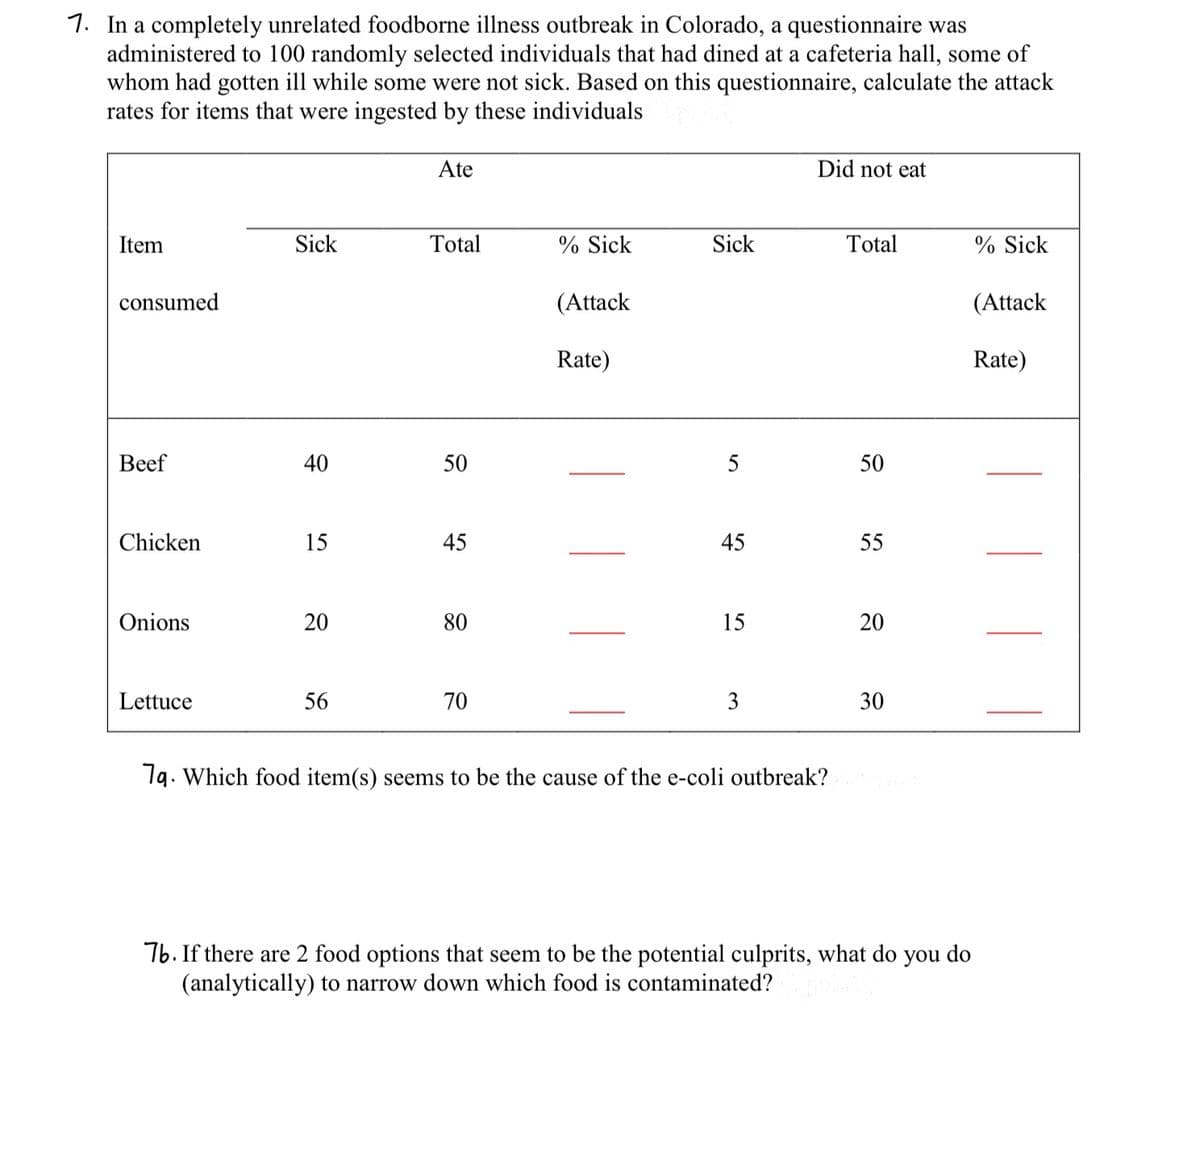 7. In a completely unrelated foodborne illness outbreak in Colorado, a questionnaire was
administered to 100 randomly selected individuals that had dined at a cafeteria hall, some of
whom had gotten ill while some were not sick. Based on this questionnaire, calculate the attack
rates for items that were ingested by these individuals
Item
consumed
Beef
Chicken
Onions
Lettuce
Sick
40
15
20
56
Ate
Total
50
45
80
70
% Sick
(Attack
Rate)
Sick
5
45
15
3
Did not eat
79. Which food item(s) seems to be the cause of the e-coli outbreak?
Total
50
55
20
30
76. If there are 2 food options that seem to be the potential culprits, what do you do
(analytically) to narrow down which food is contaminated?
% Sick
(Attack
Rate)